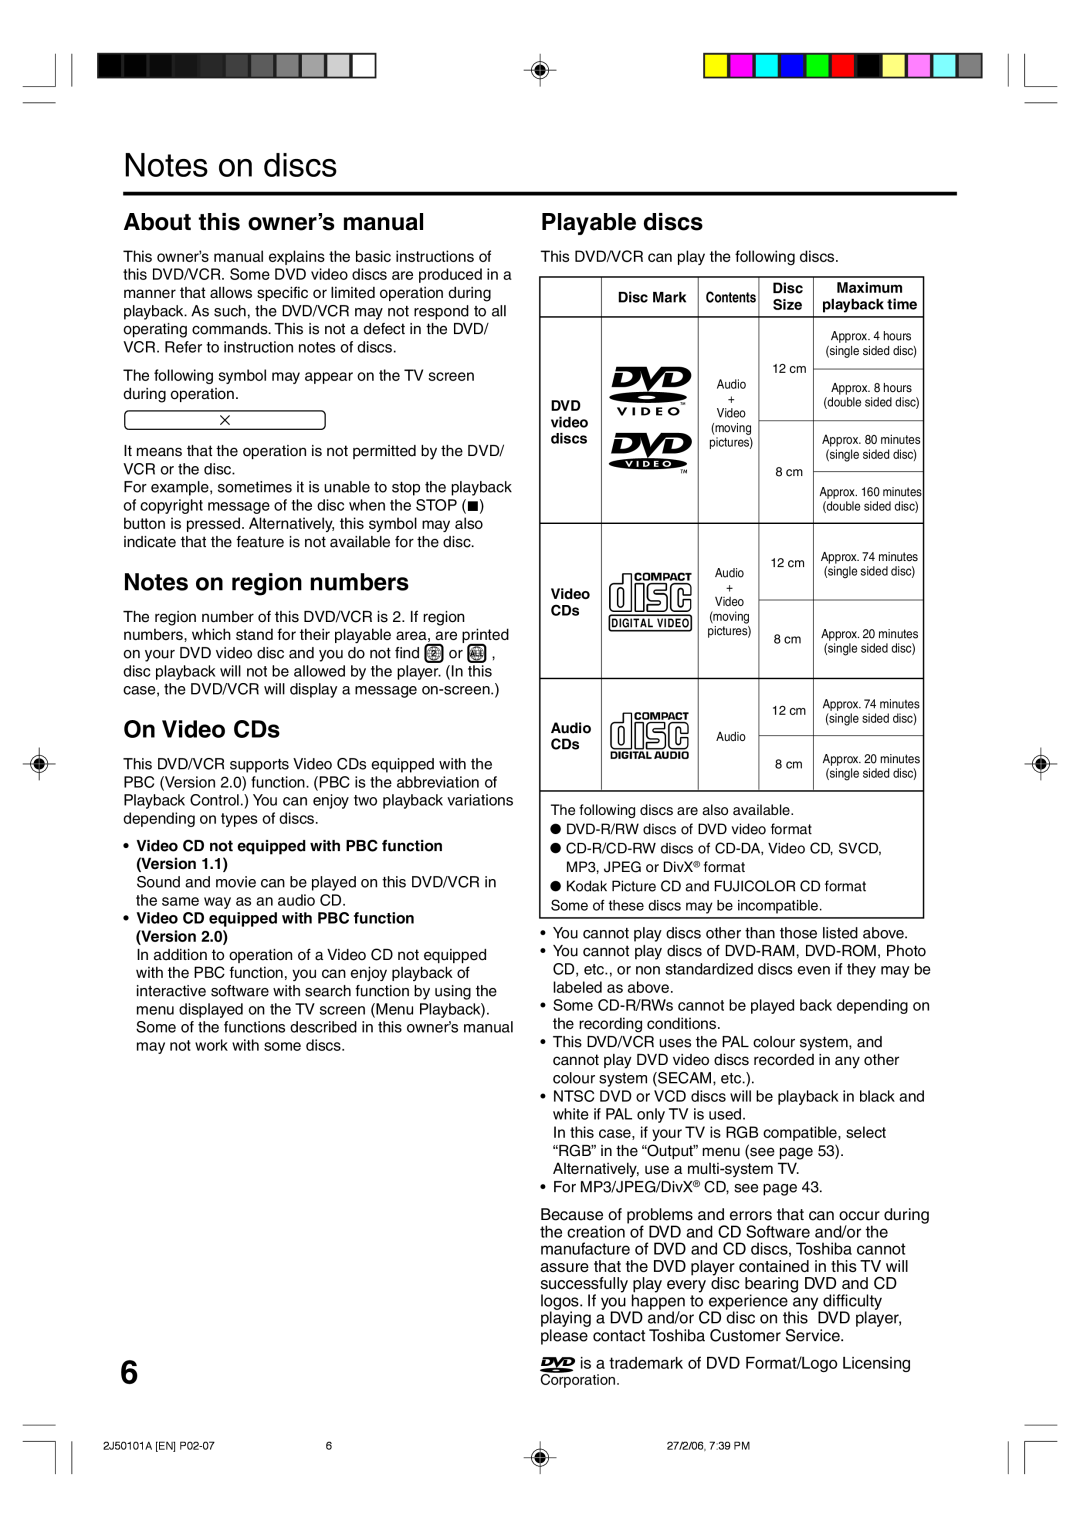 Toshiba SD-37VBSB Notes on discs, About this owner’s manual, Notes on region numbers, On Video CDs, Playable discs, Disc 